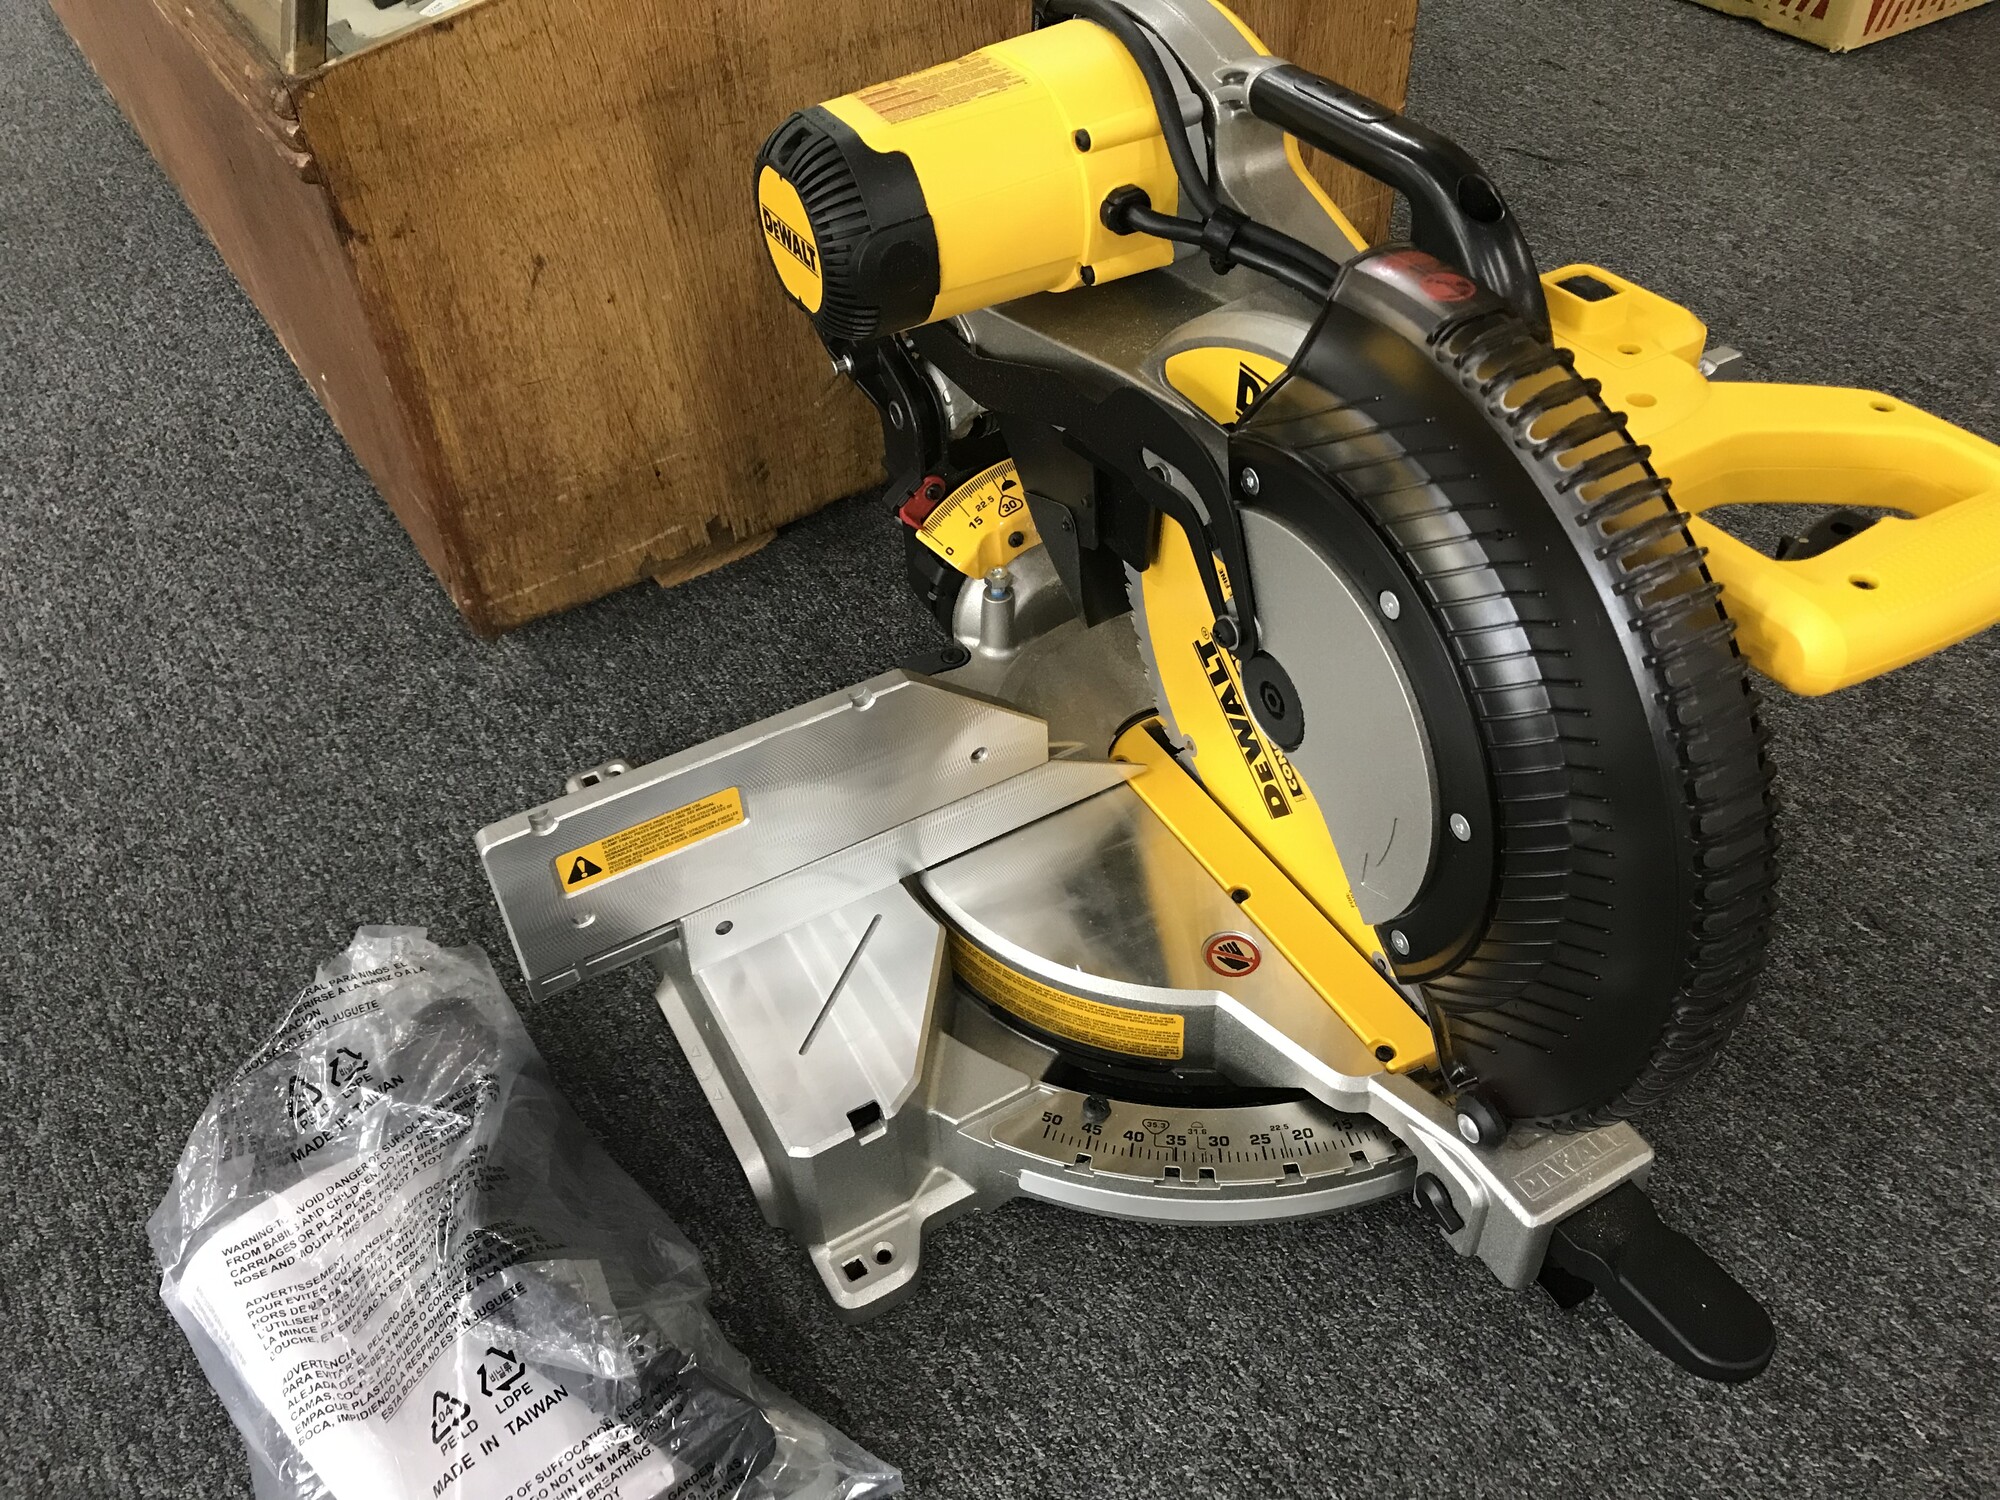 Double Bevel Compound Miter Saw, DeWalt, Size: 12in
DWS716 with cut line laser

Like New